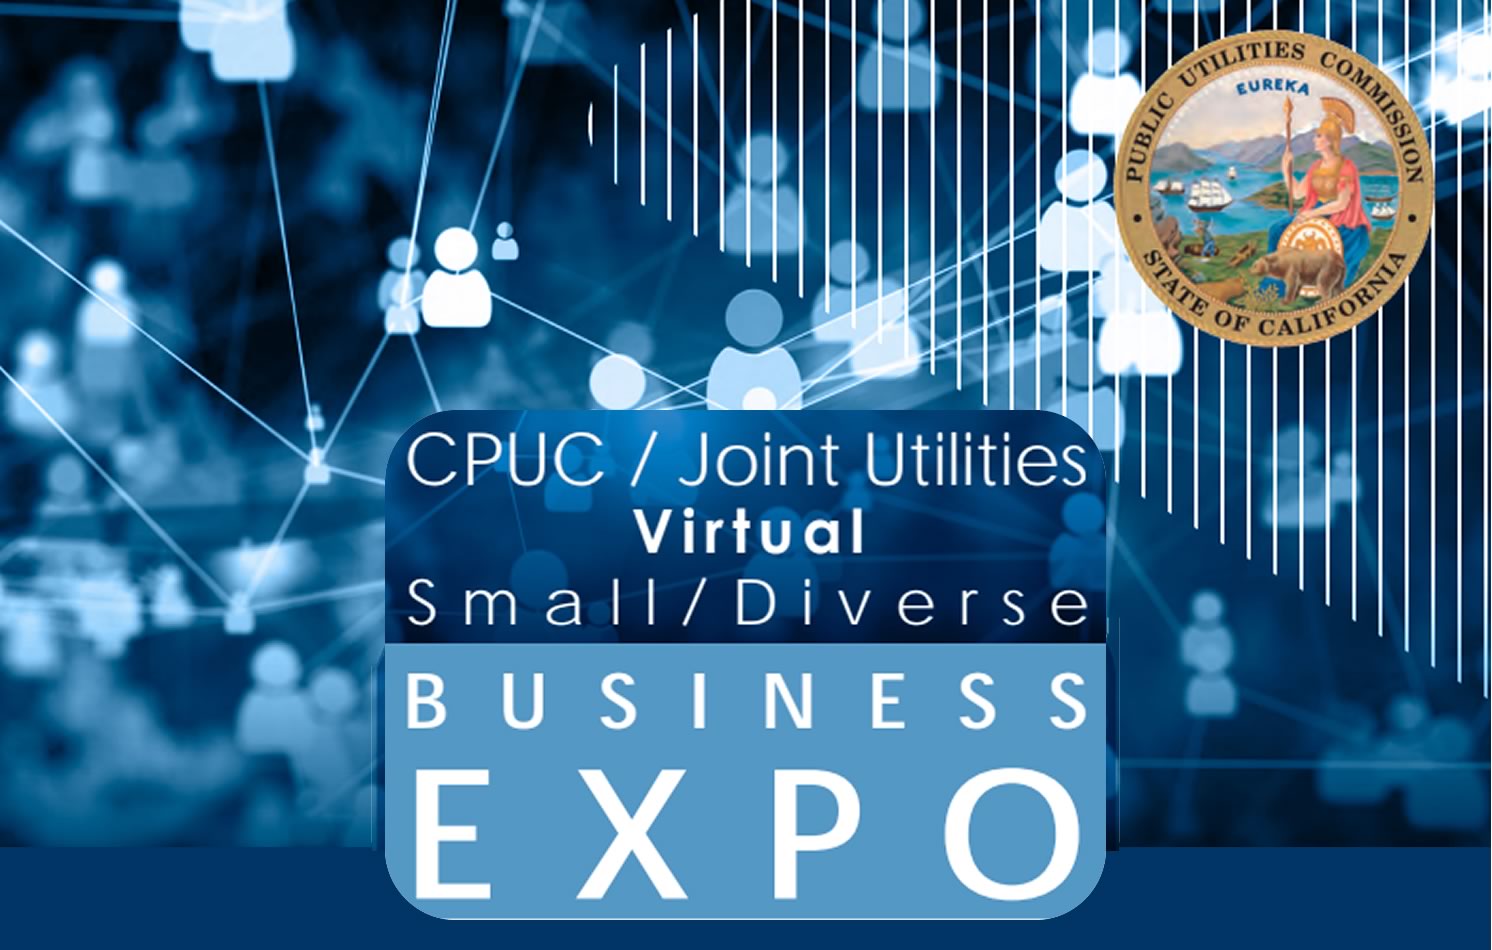 You are currently viewing CPUC/ Joint Utilities Virtual Small/ Diverse Business Expo